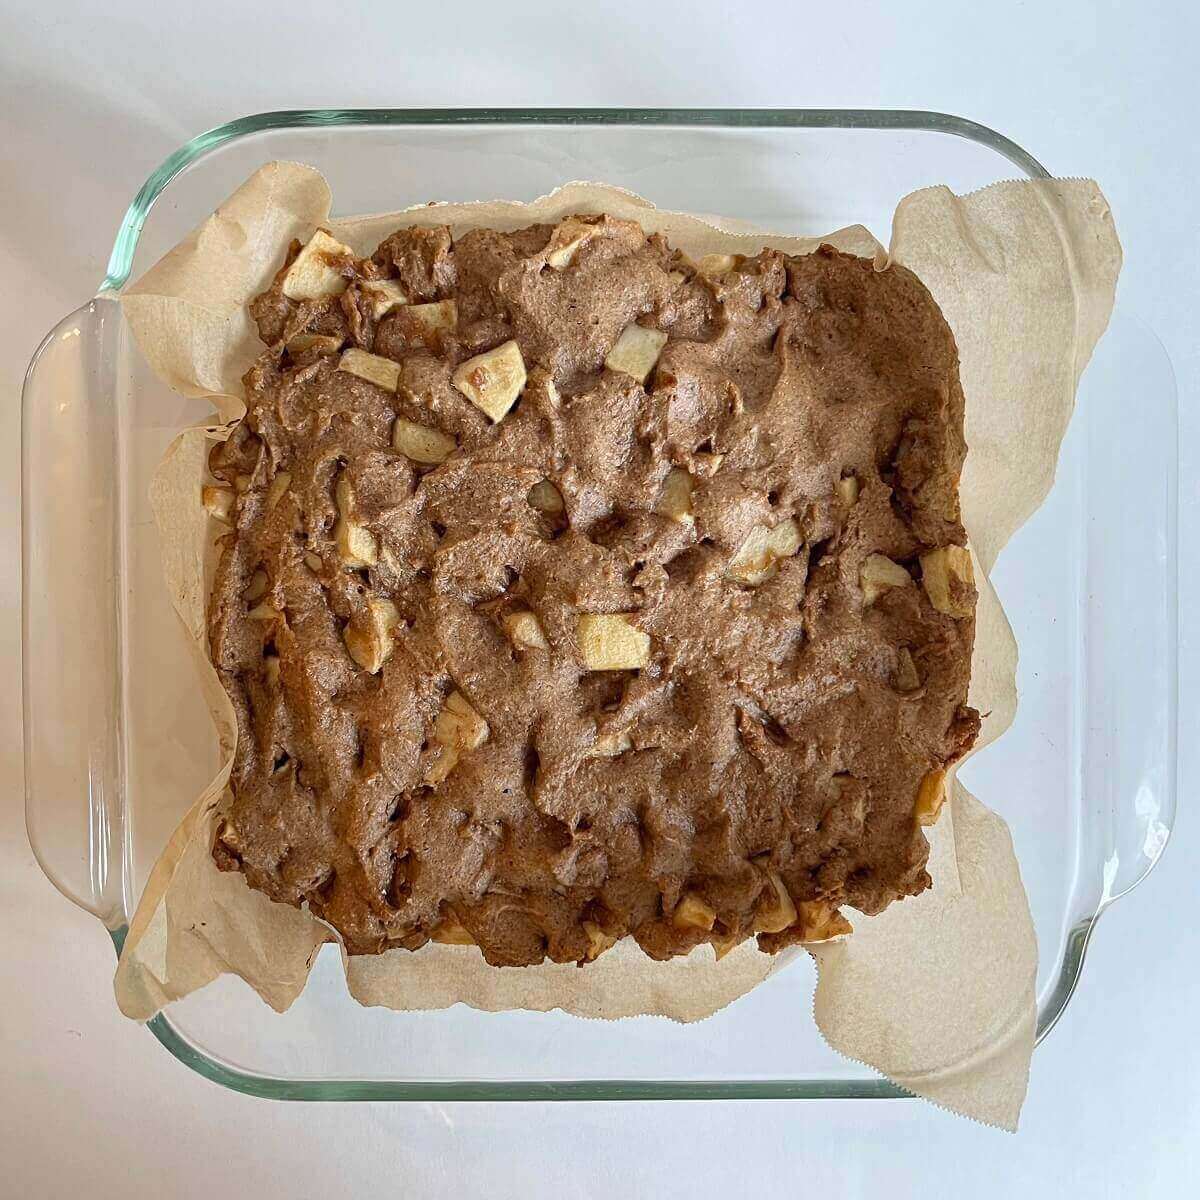 Freshly baked bars in a glass baking pan.